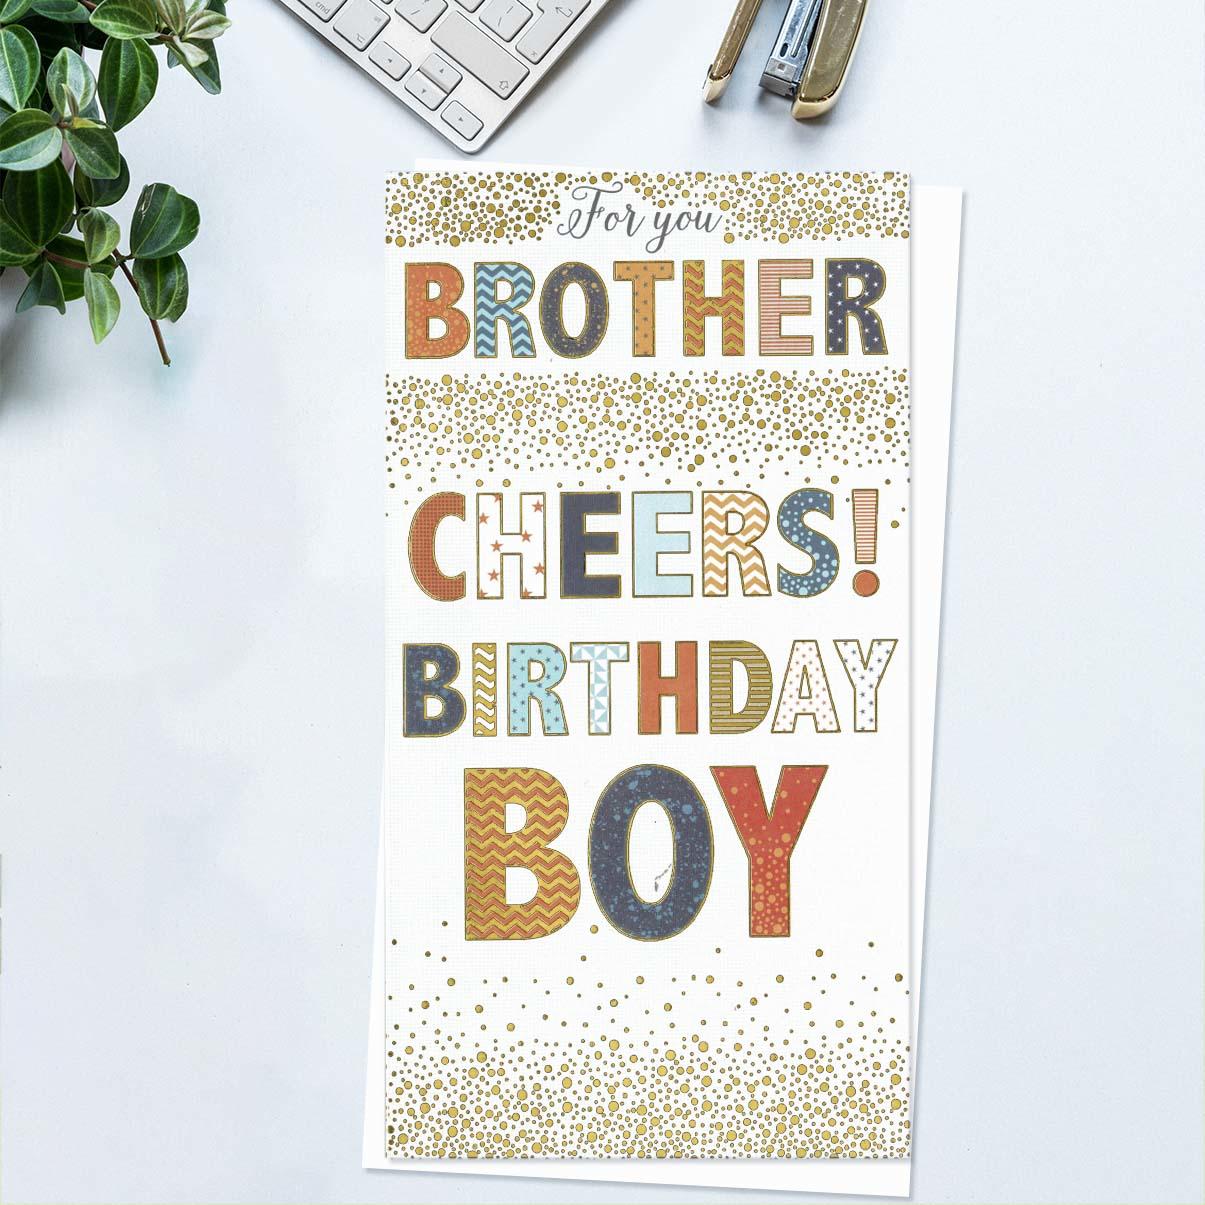 Brother Cheers Birthday Boy Card Front Image